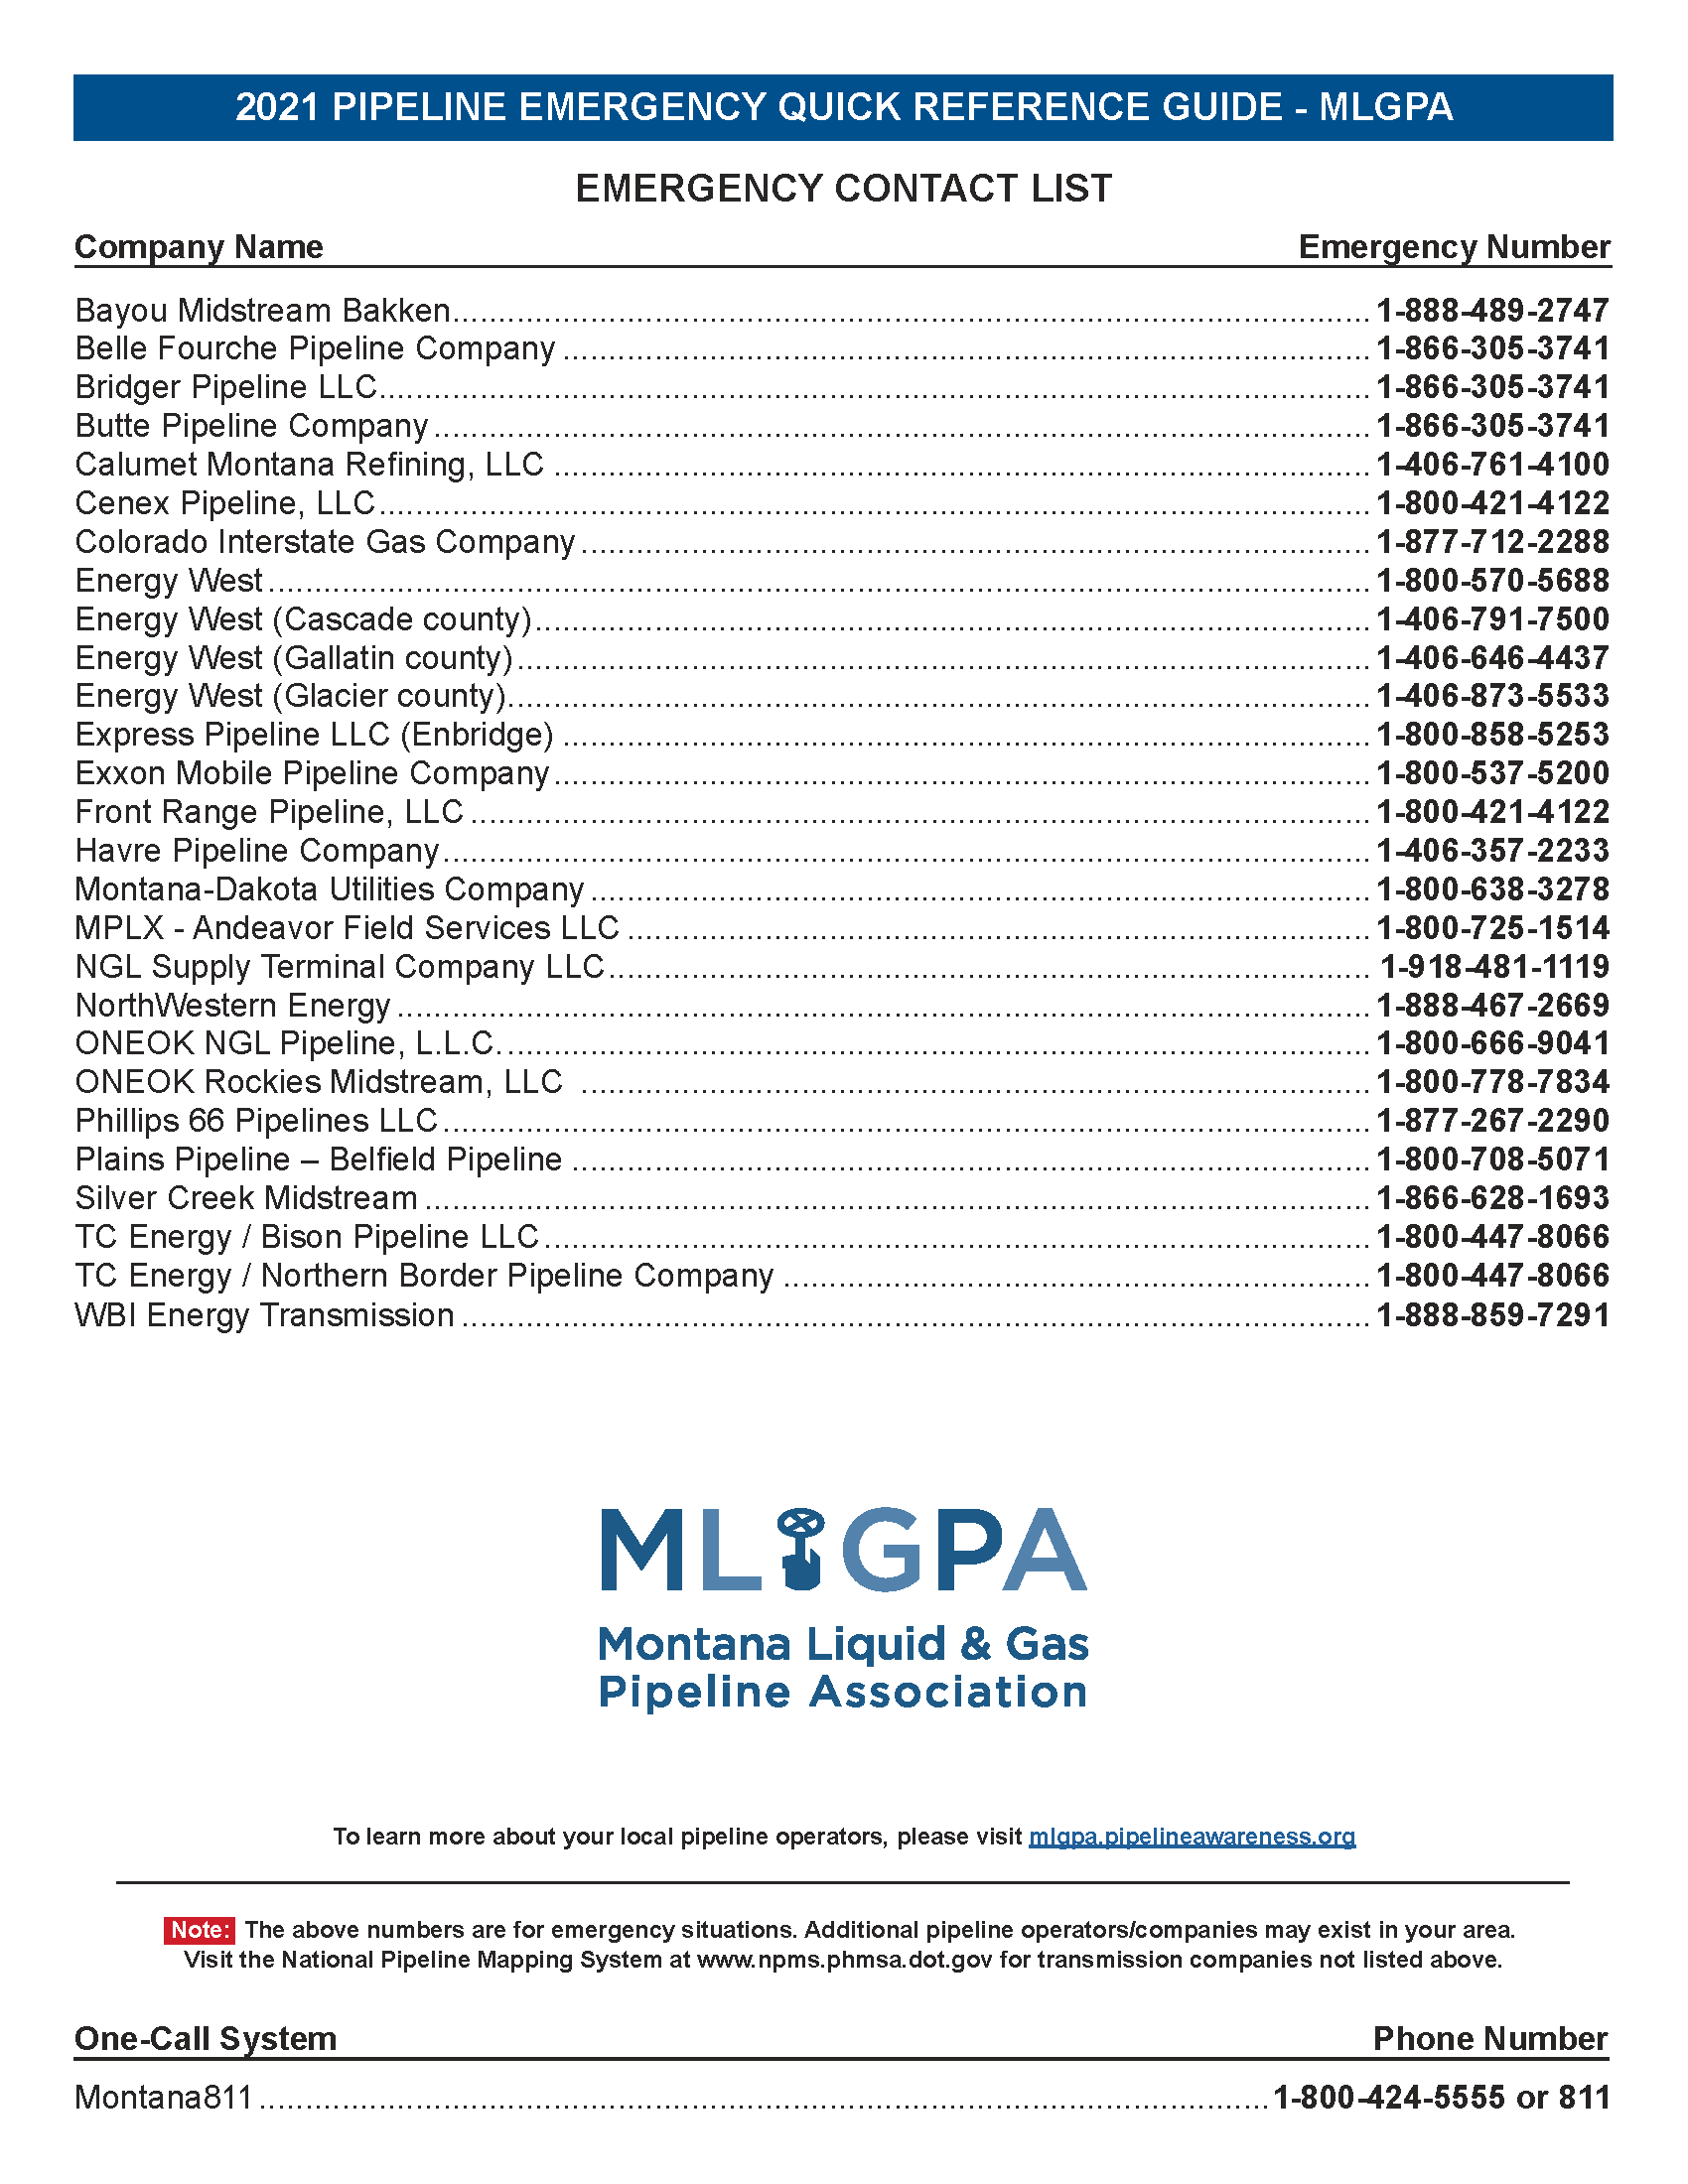 2021 MLGPA Quick Reference Guide ER